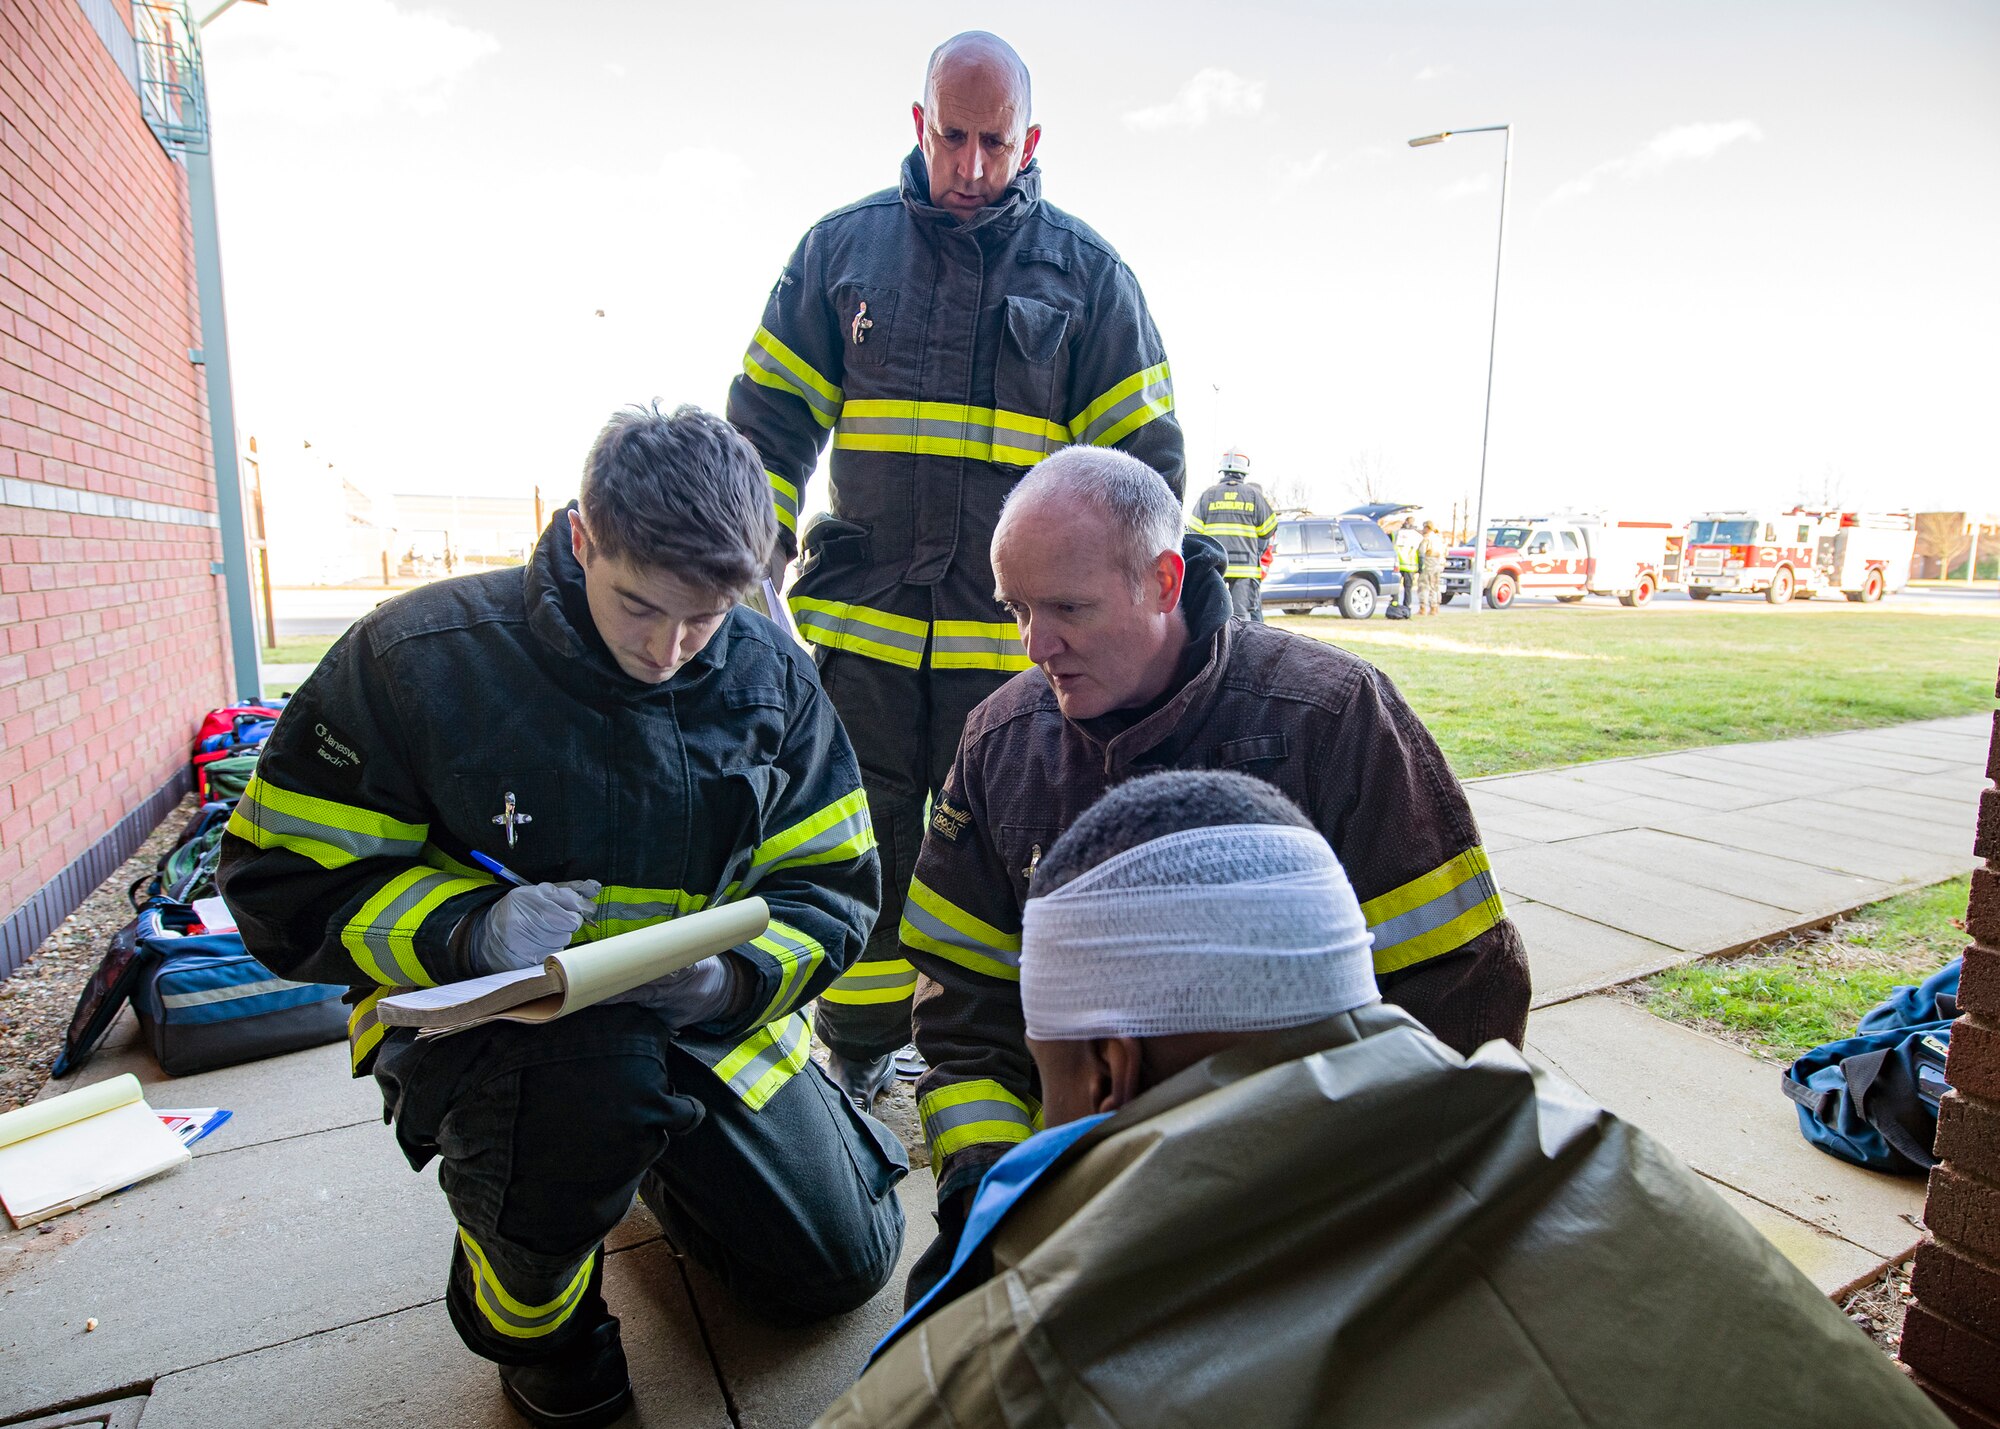 Firefighters from the 422d Civil Engineer Squadron, take vitals from a simulated victim during a readiness exercise, at RAF Molesworth, England, Feb. 11, 2020.  The exercise tested the wing’s preparedness and response capabilities to an emergency situation. (U.S. Air Force photo by Senior Airman Eugene Oliver)